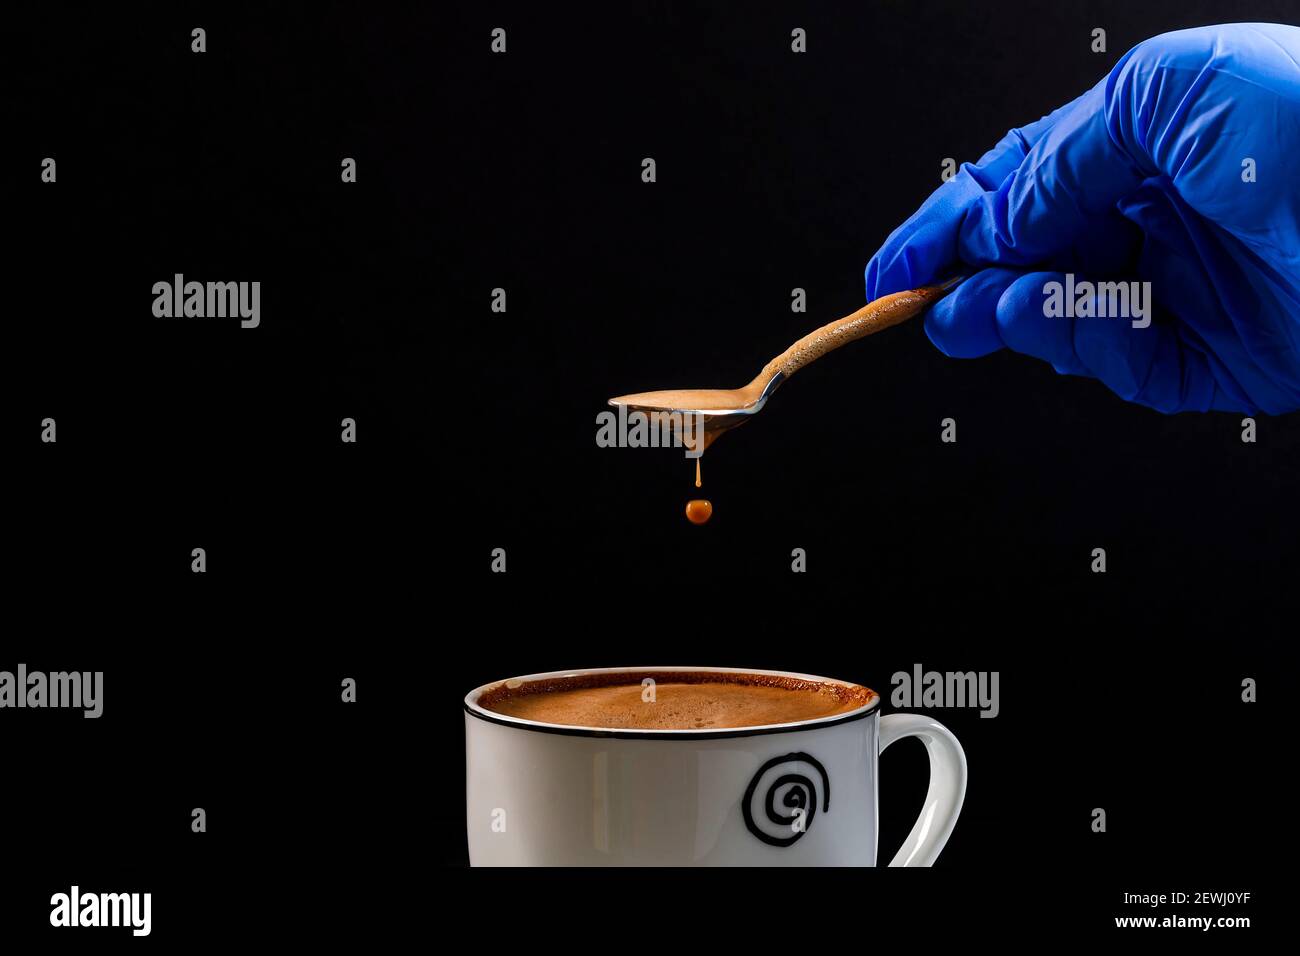 The hand of a person wearing a latex glove holds a spoon from which a drop of latte falls.This is a horizontal format photo taken against a black back Stock Photo